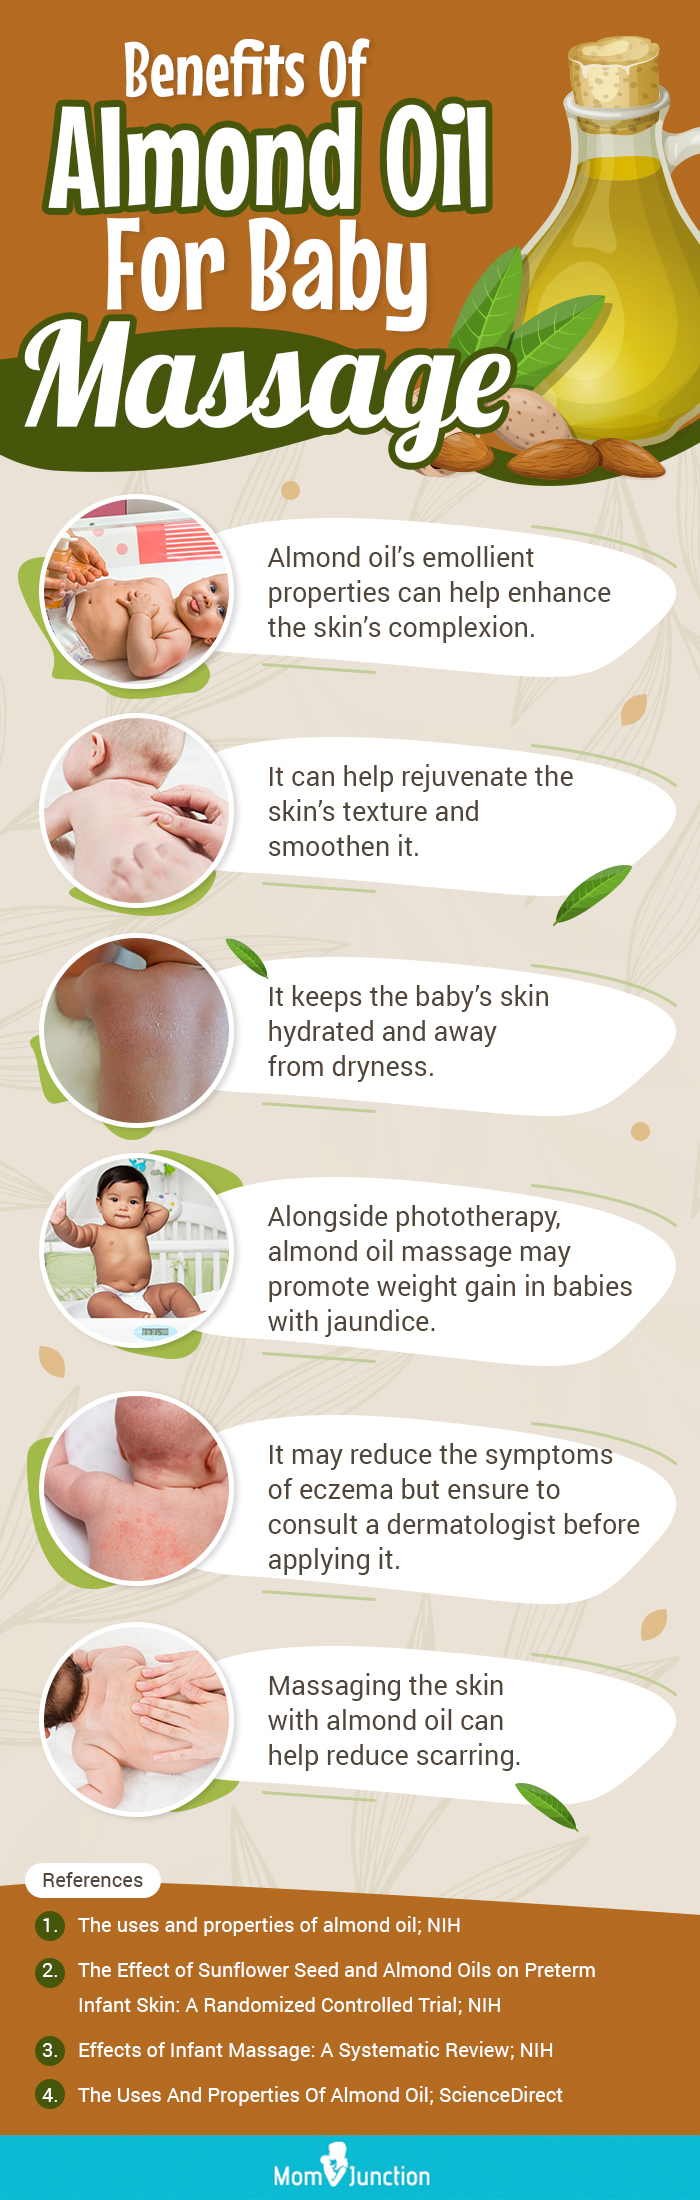 Benefits Of Almond Oil For Baby Massage (infographic)